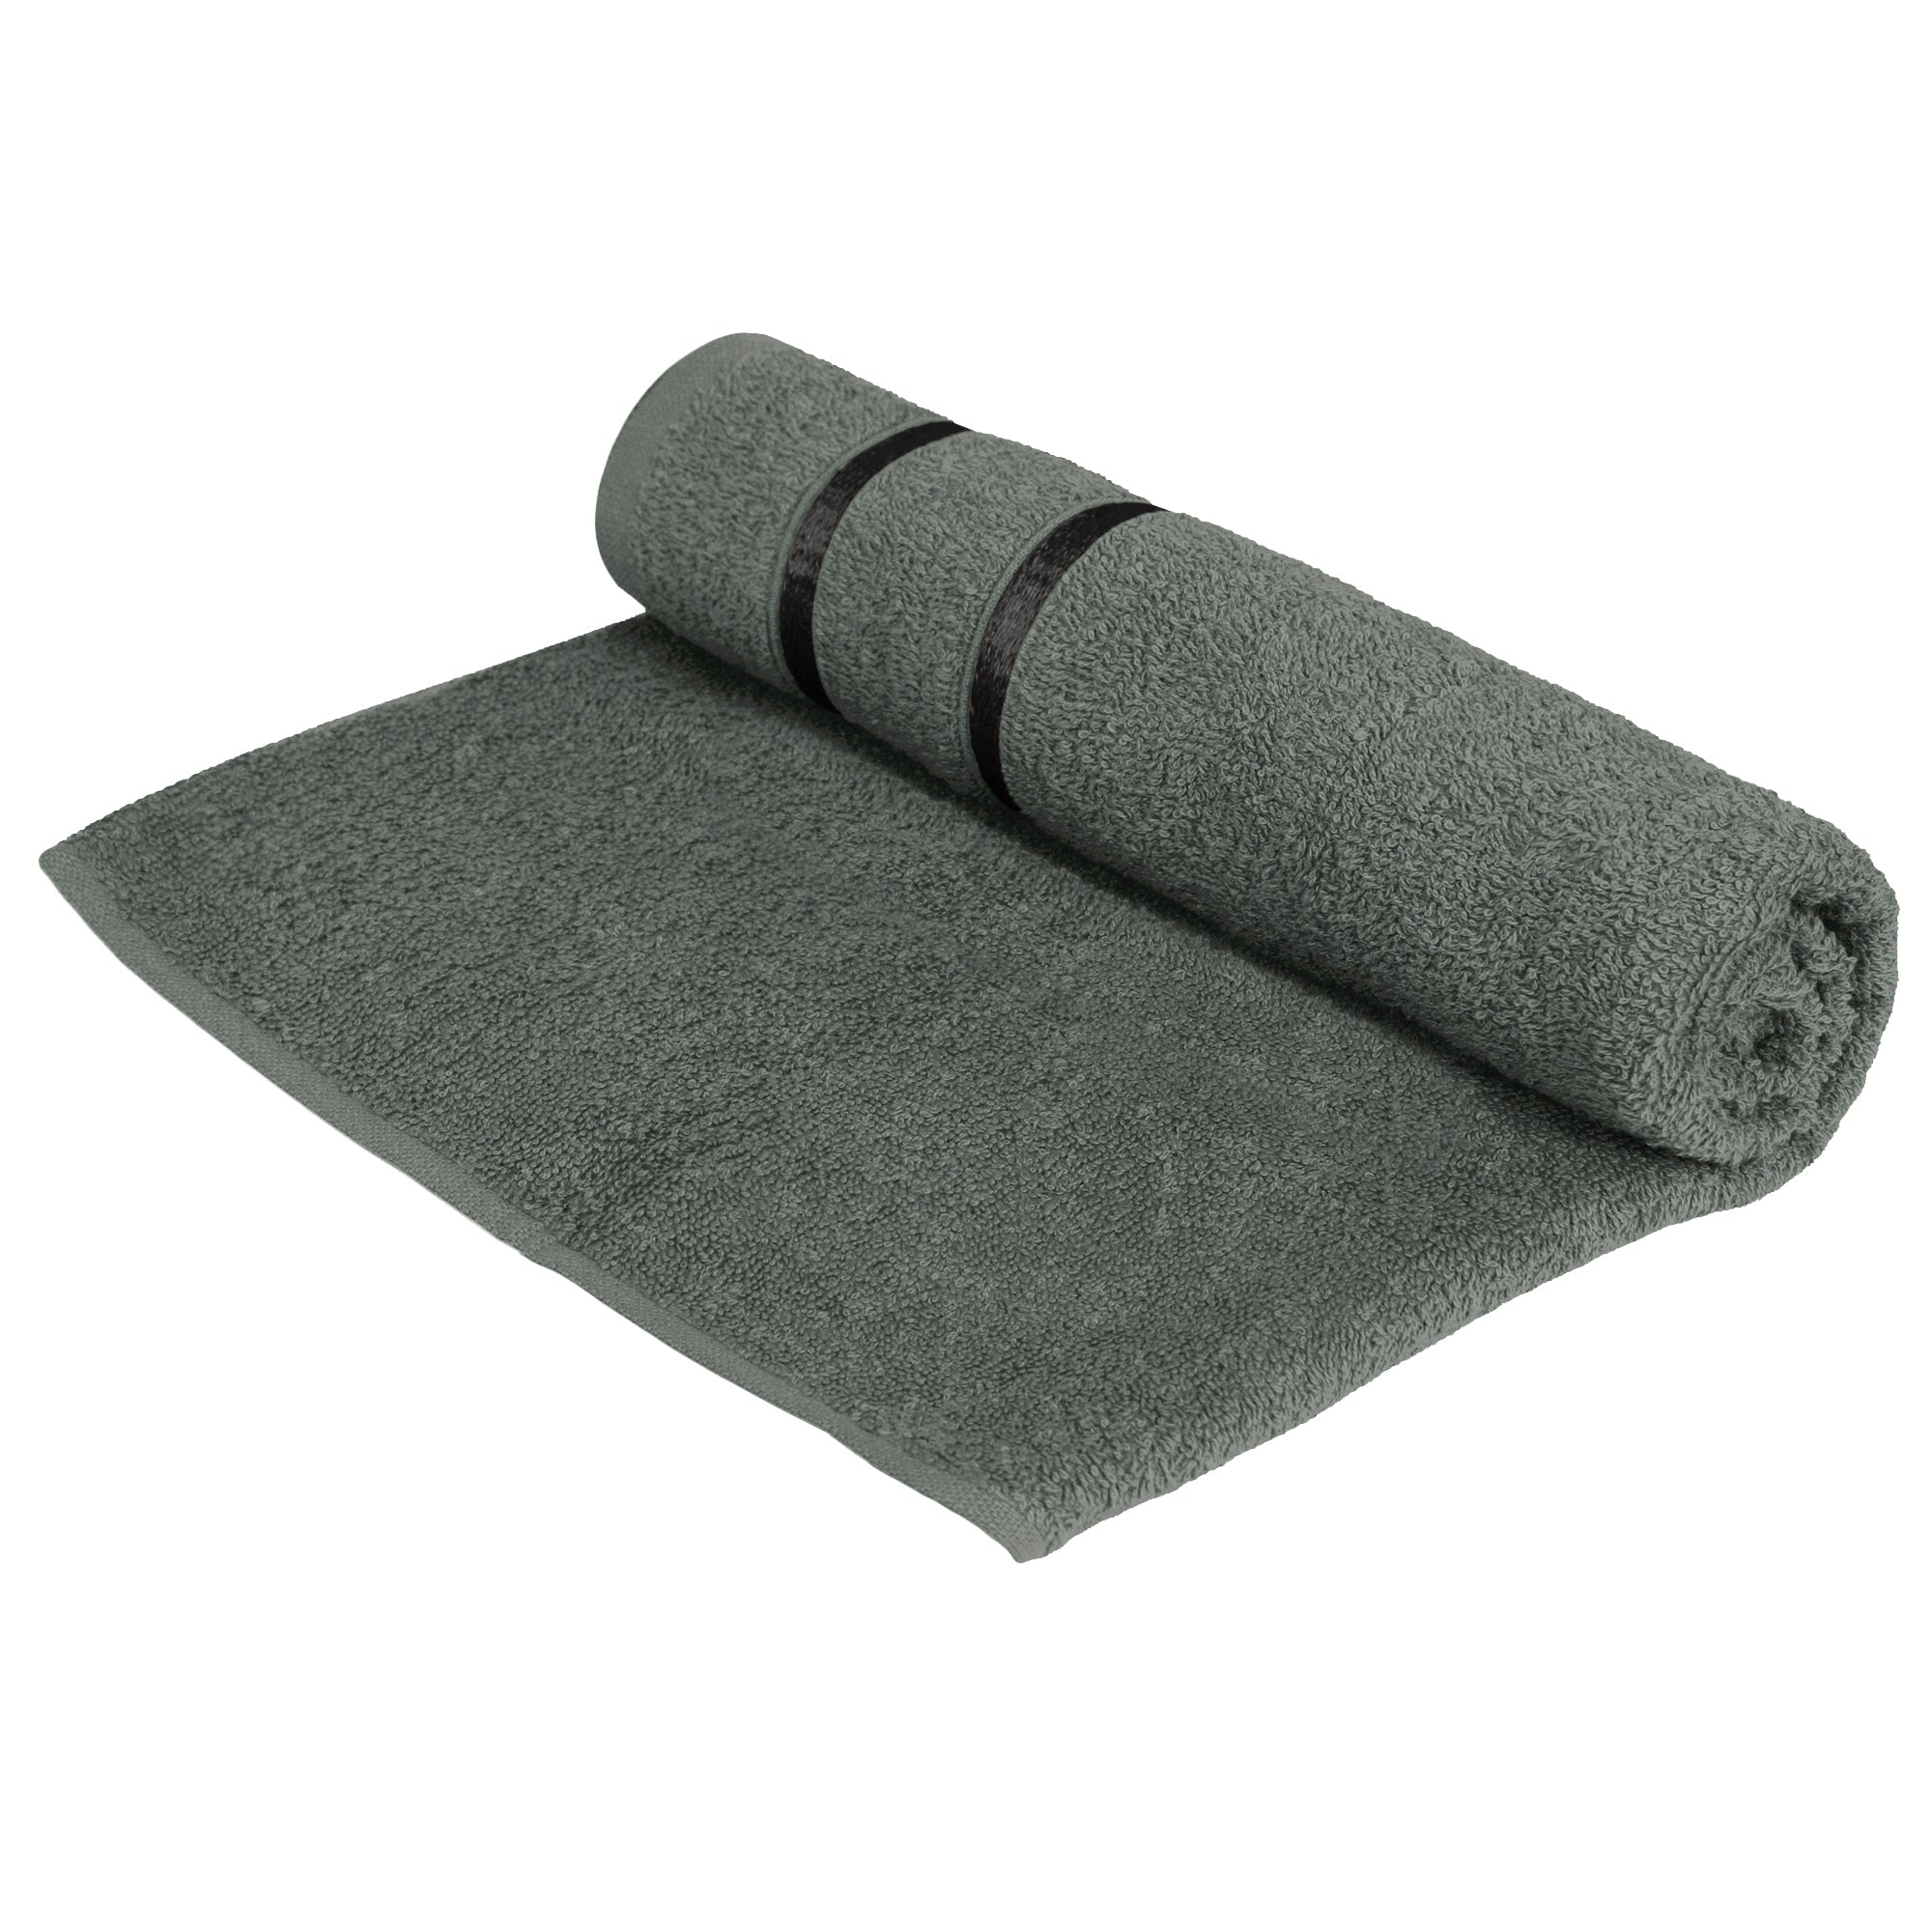 Story@Home 2 Units 100% Cotton Ladies Bath Towels - Green and Charcoal Grey